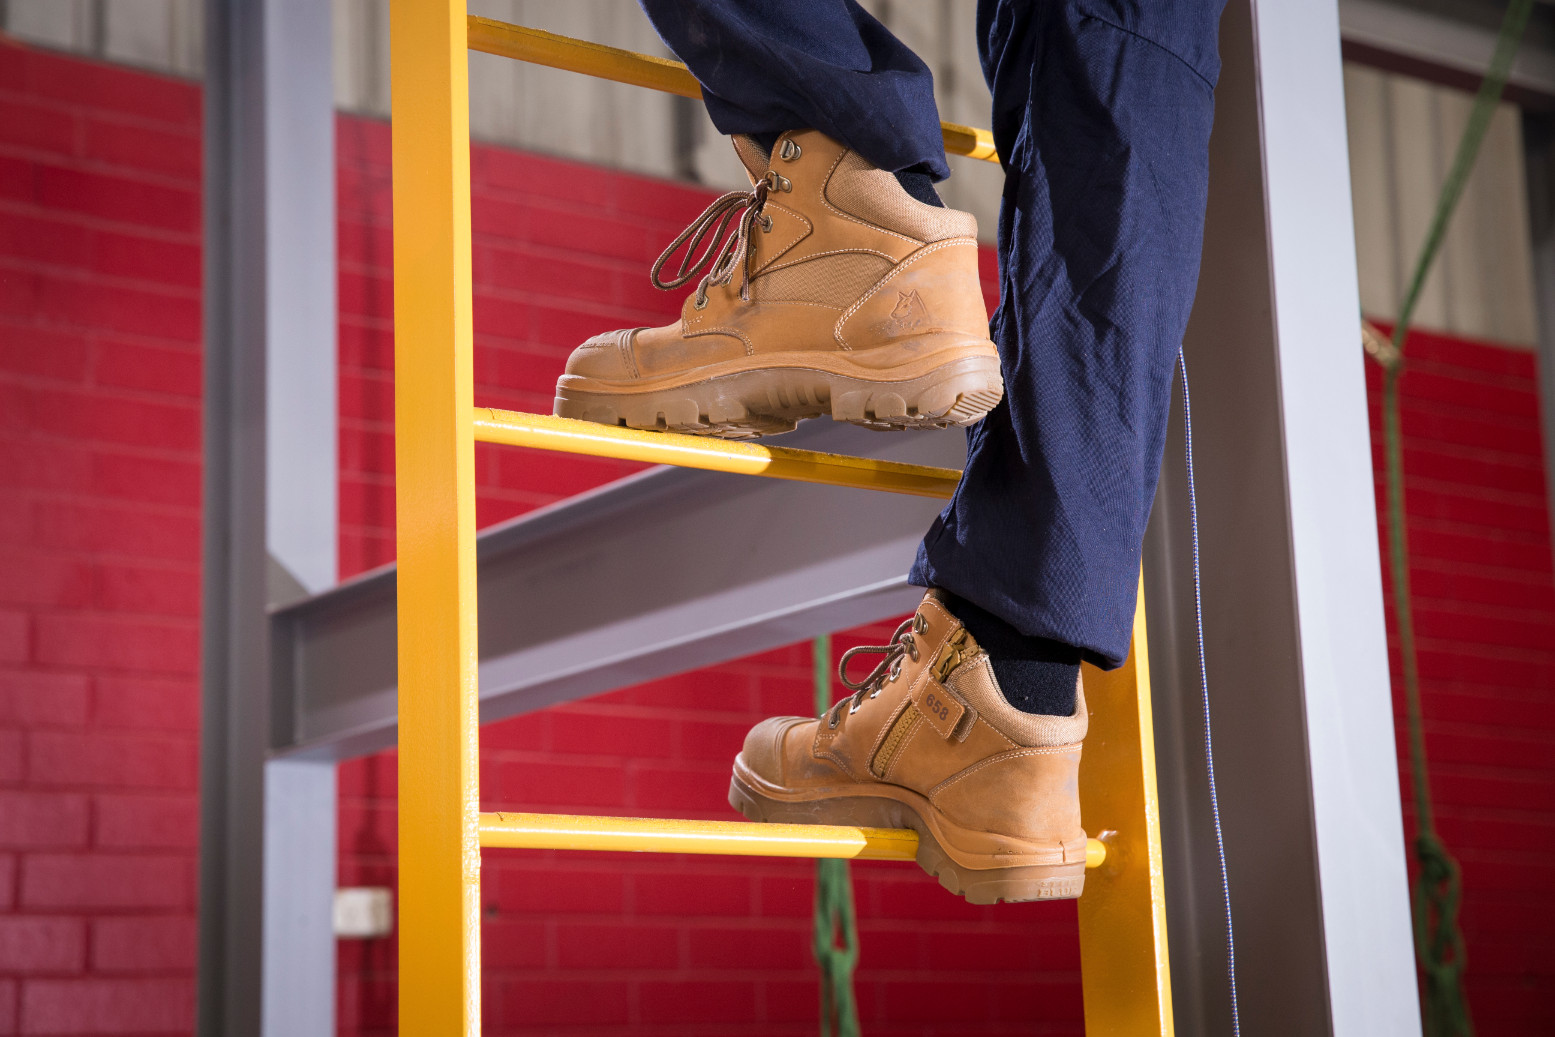 Mens Work Boots - Parkes Wheat Scuff Cap going up the Ladder